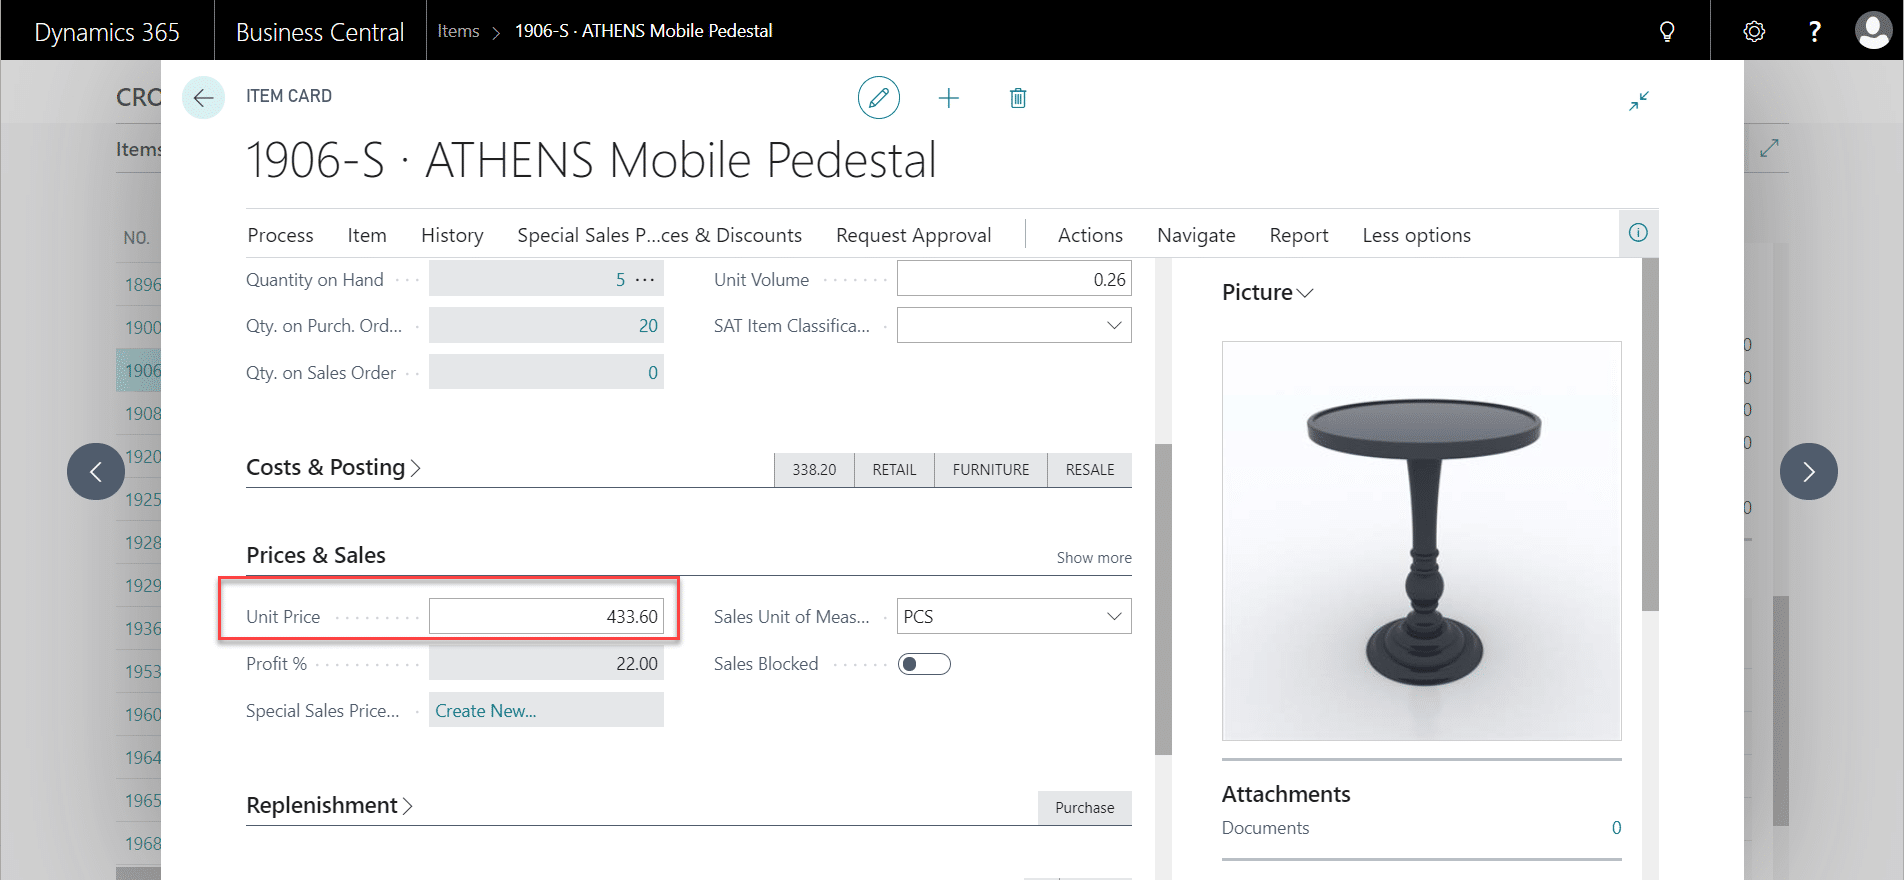 Pricing in dynamics 365 business central, part i: setting up varied pricing